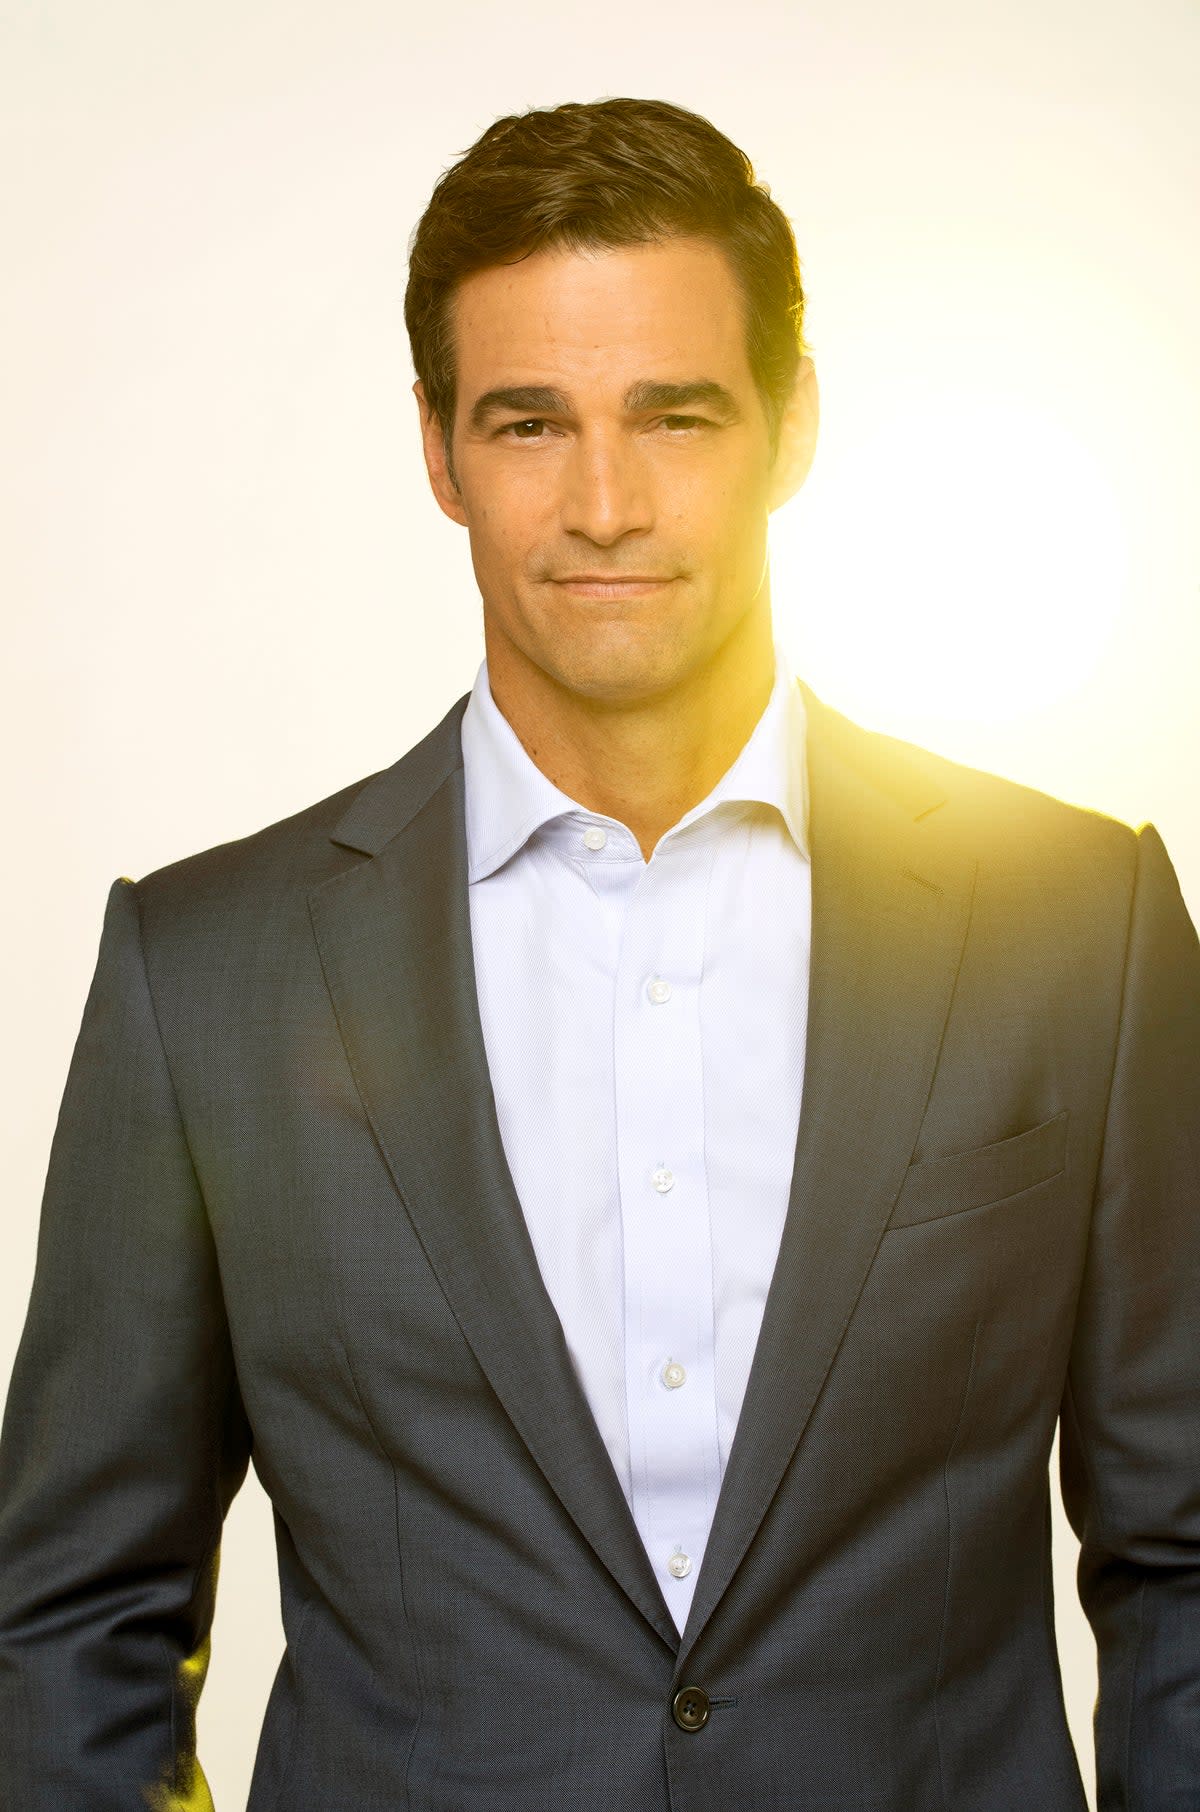 Rob Marciano was reportedly fired from ABC News after a shouting match with a producer (ABC/Heidi Gutman)